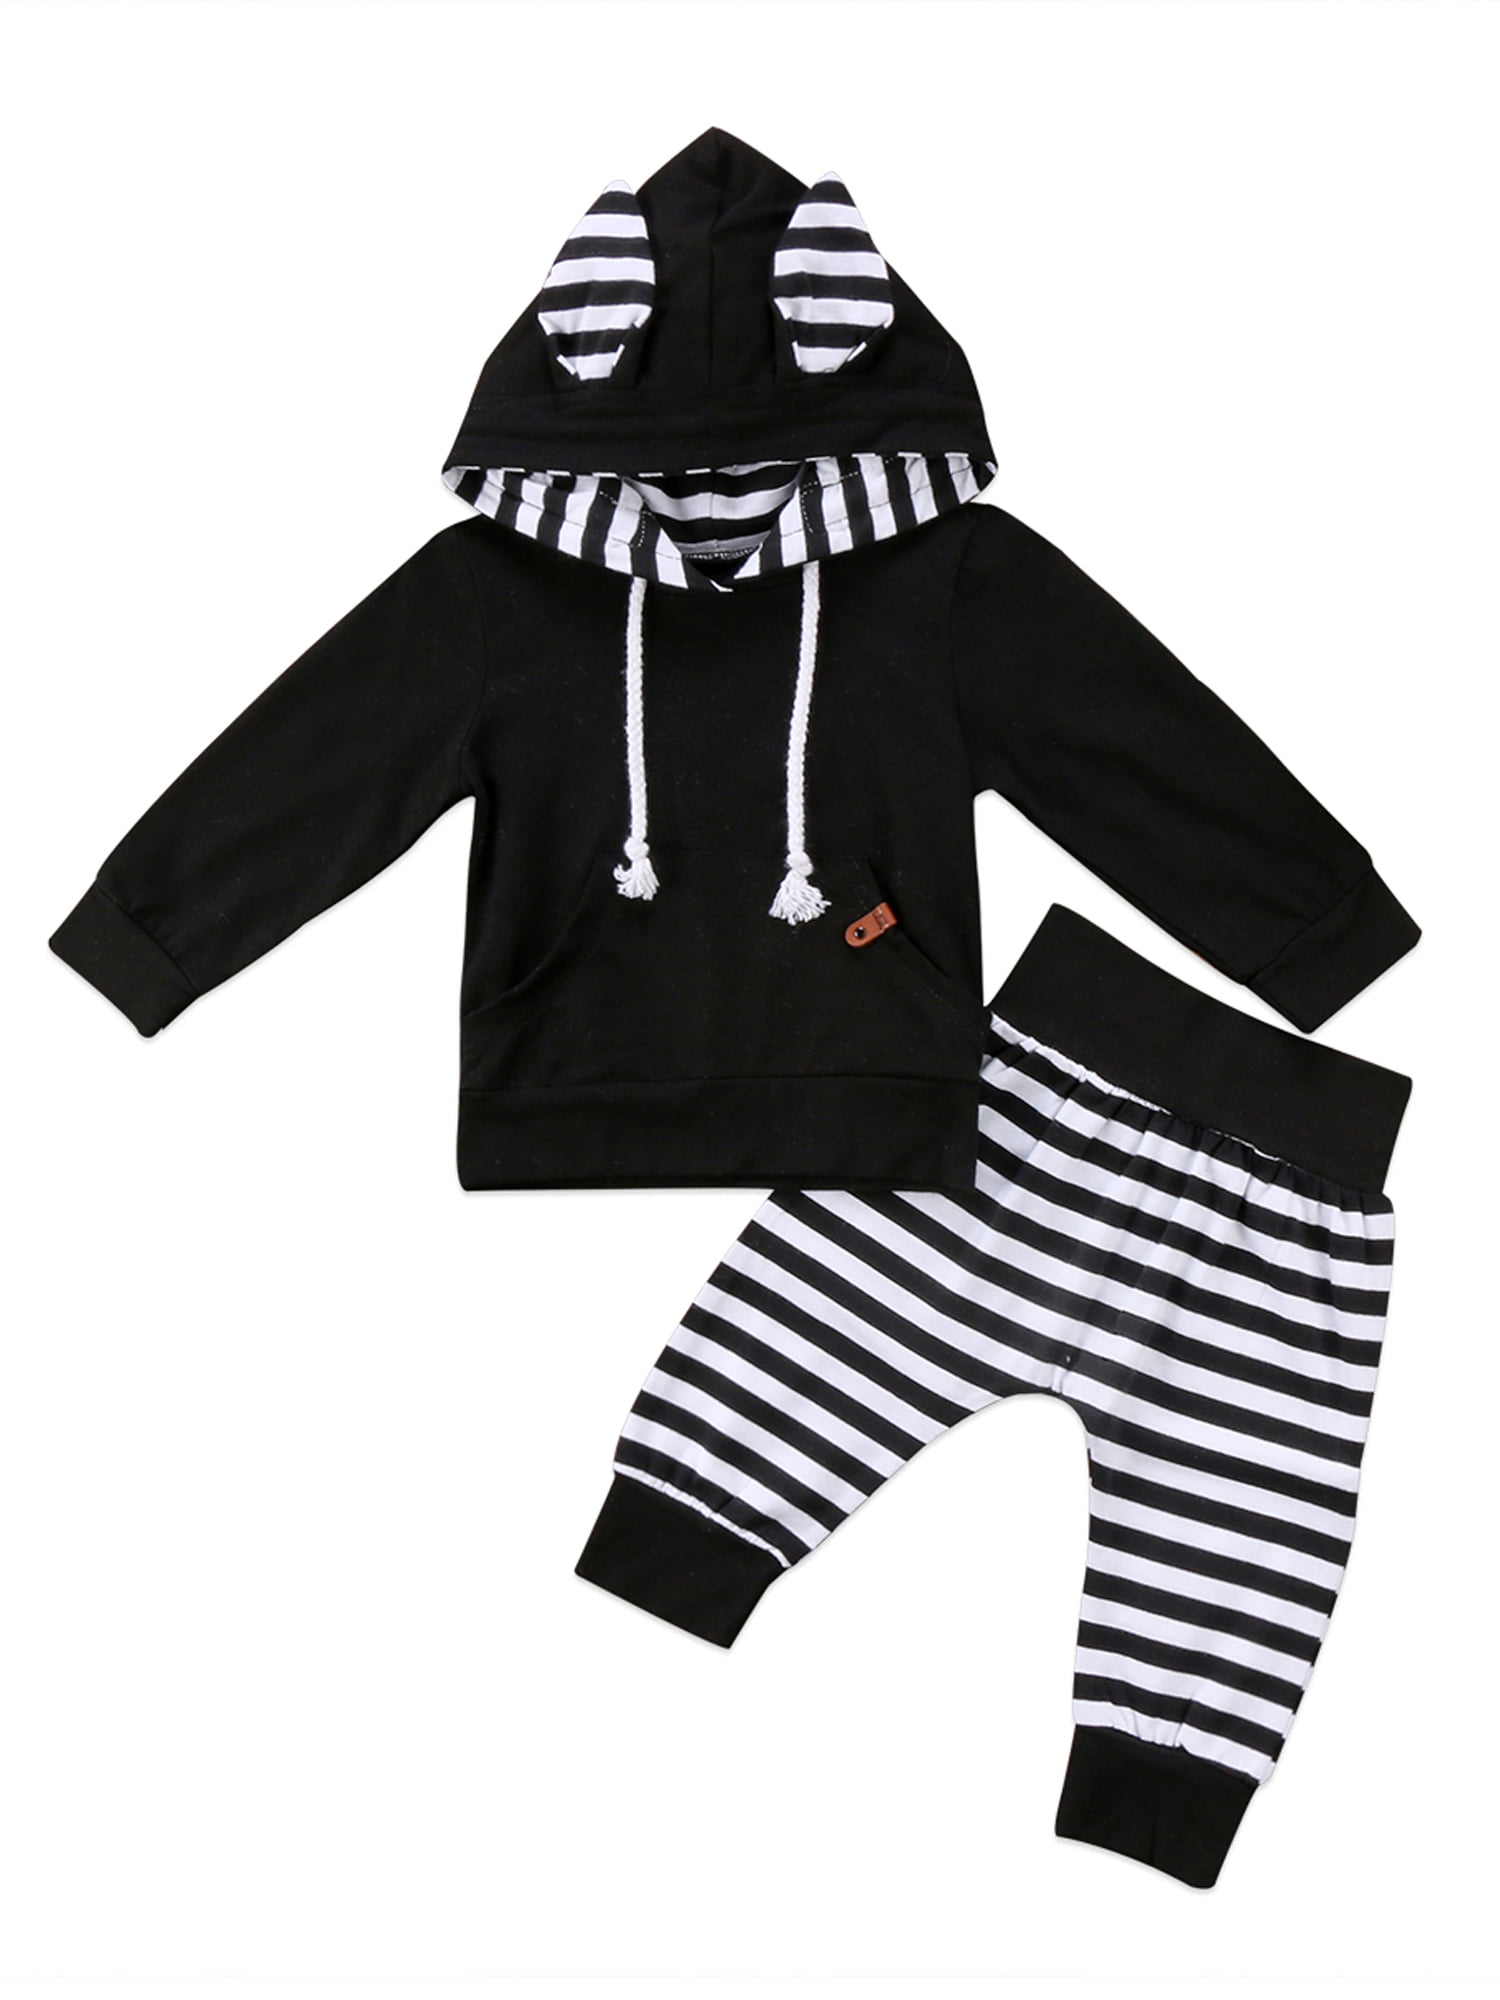 2PCS Toddler Kids Baby Boys Tops Hoodie T-shirt Shorts Pants Outfits Clothes US